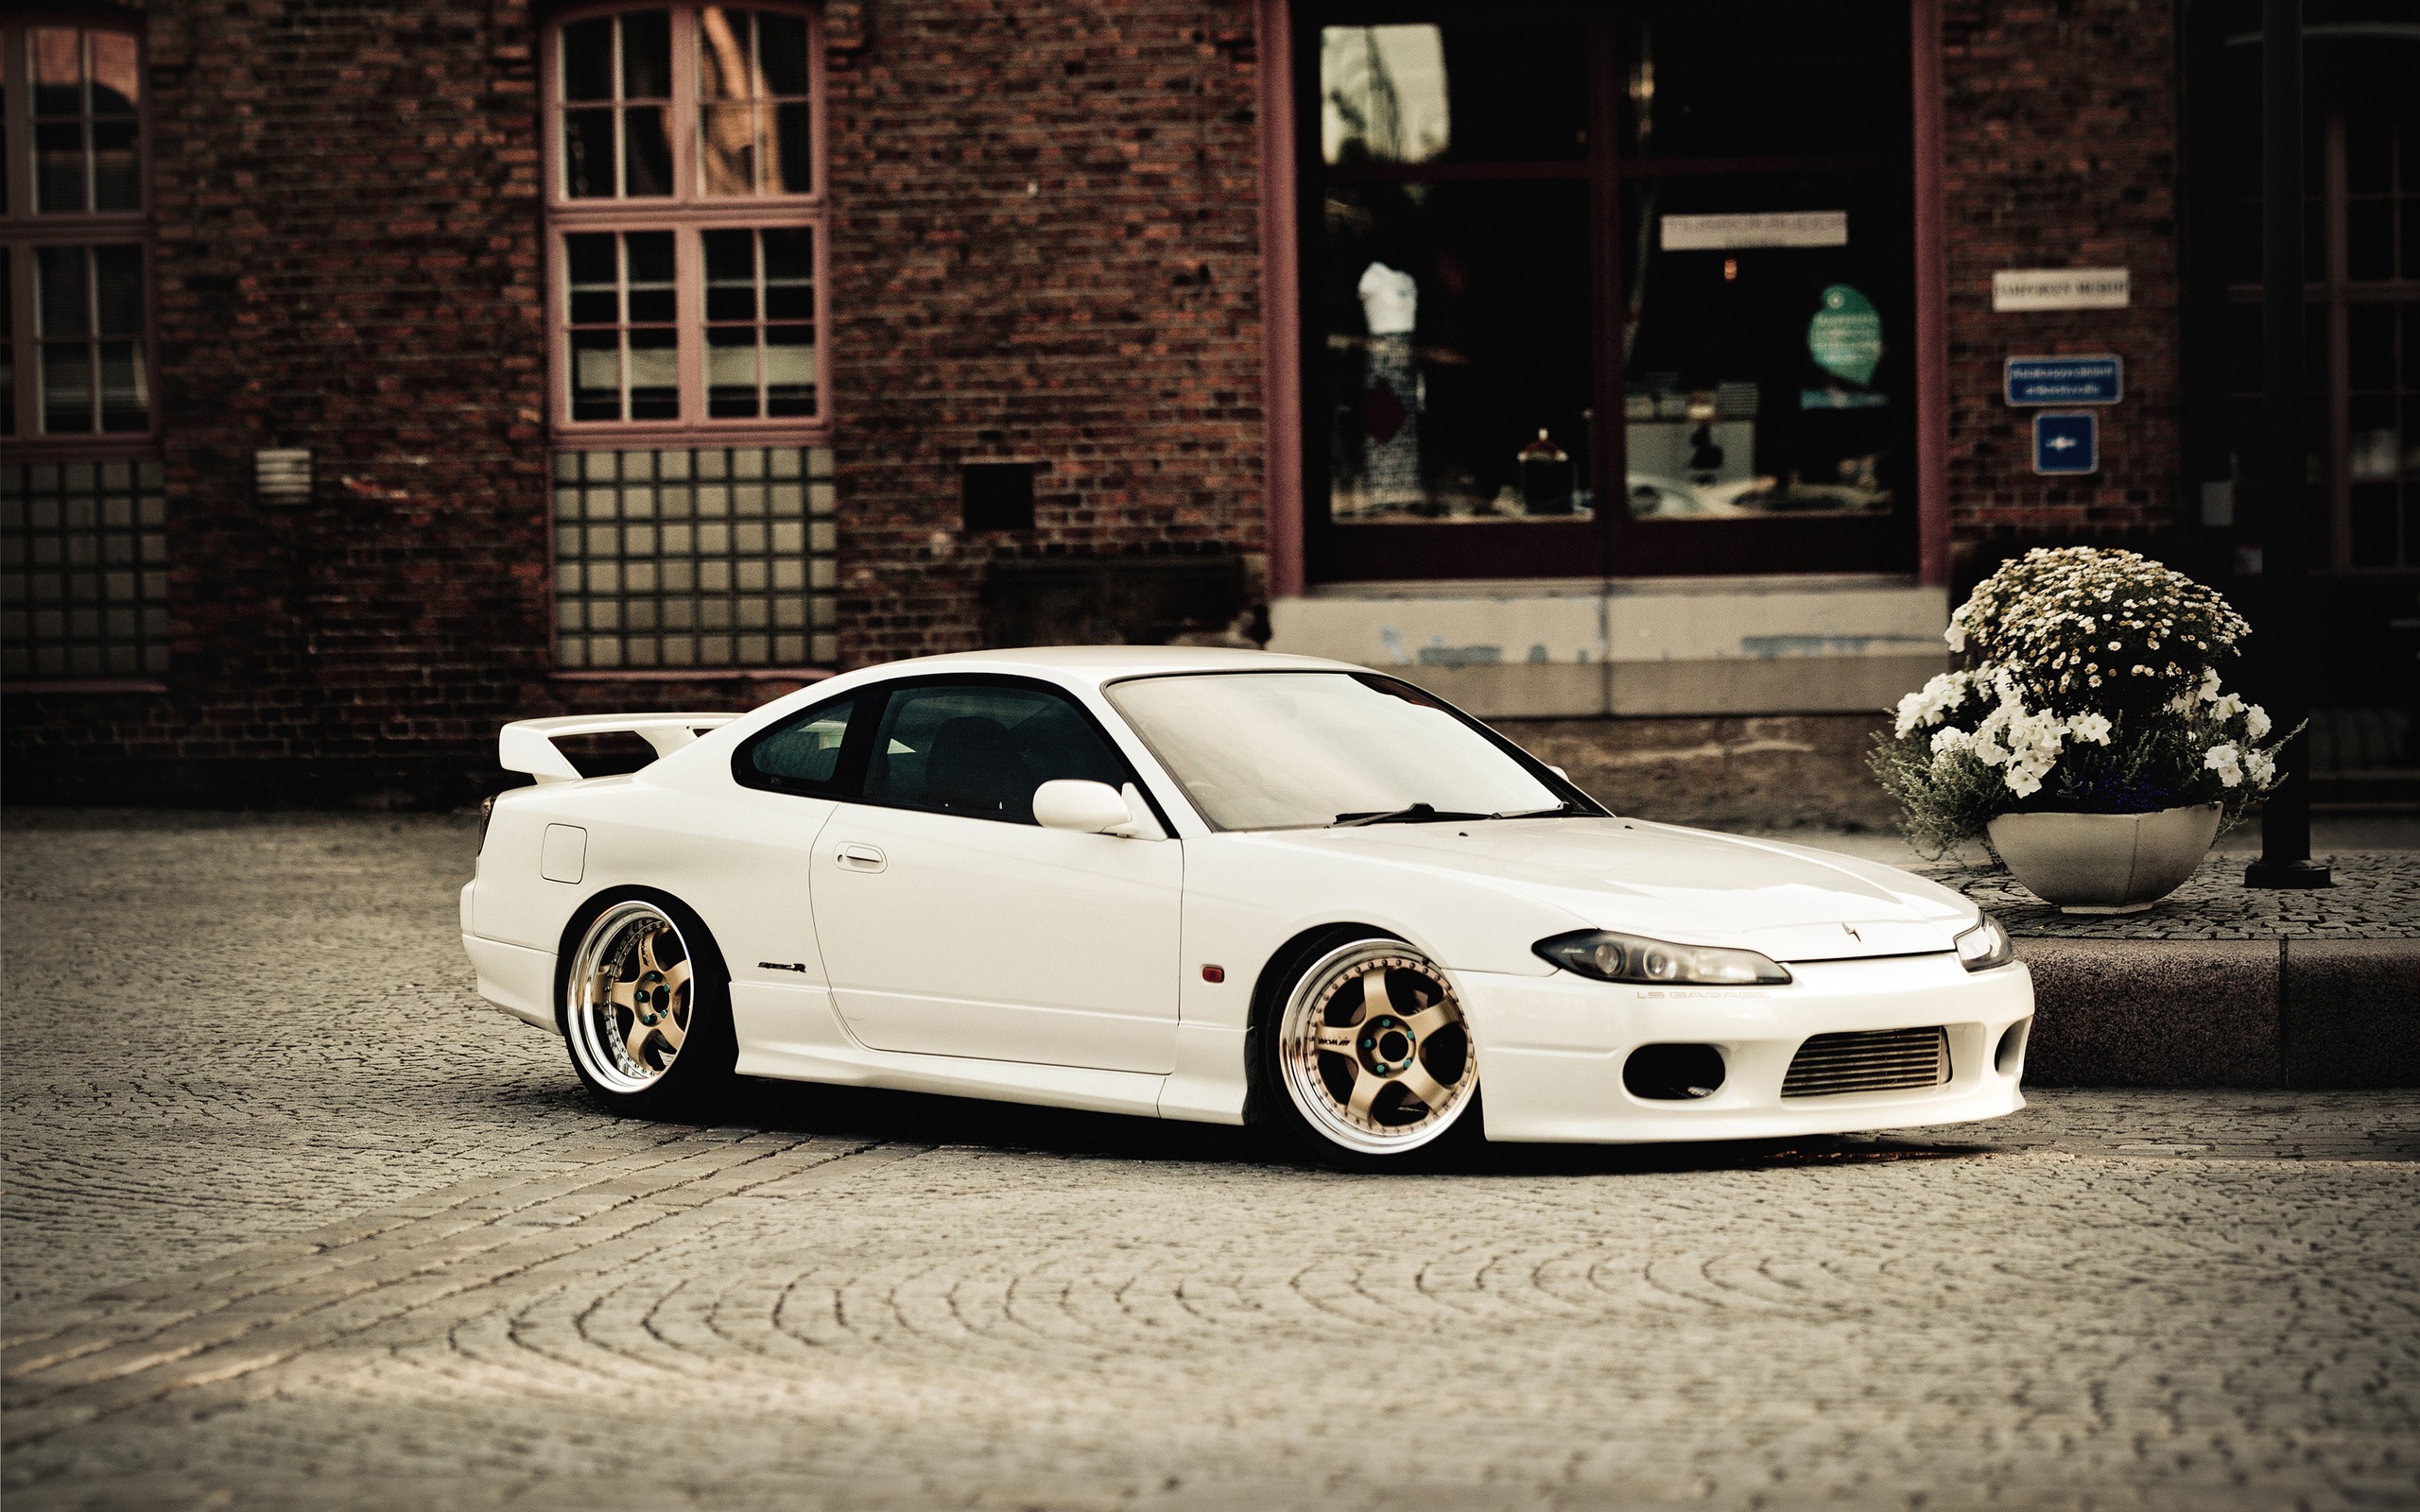 General 2560x1600 stance (cars) white cars coupe car vehicle Nissan Nissan Silvia Japanese cars